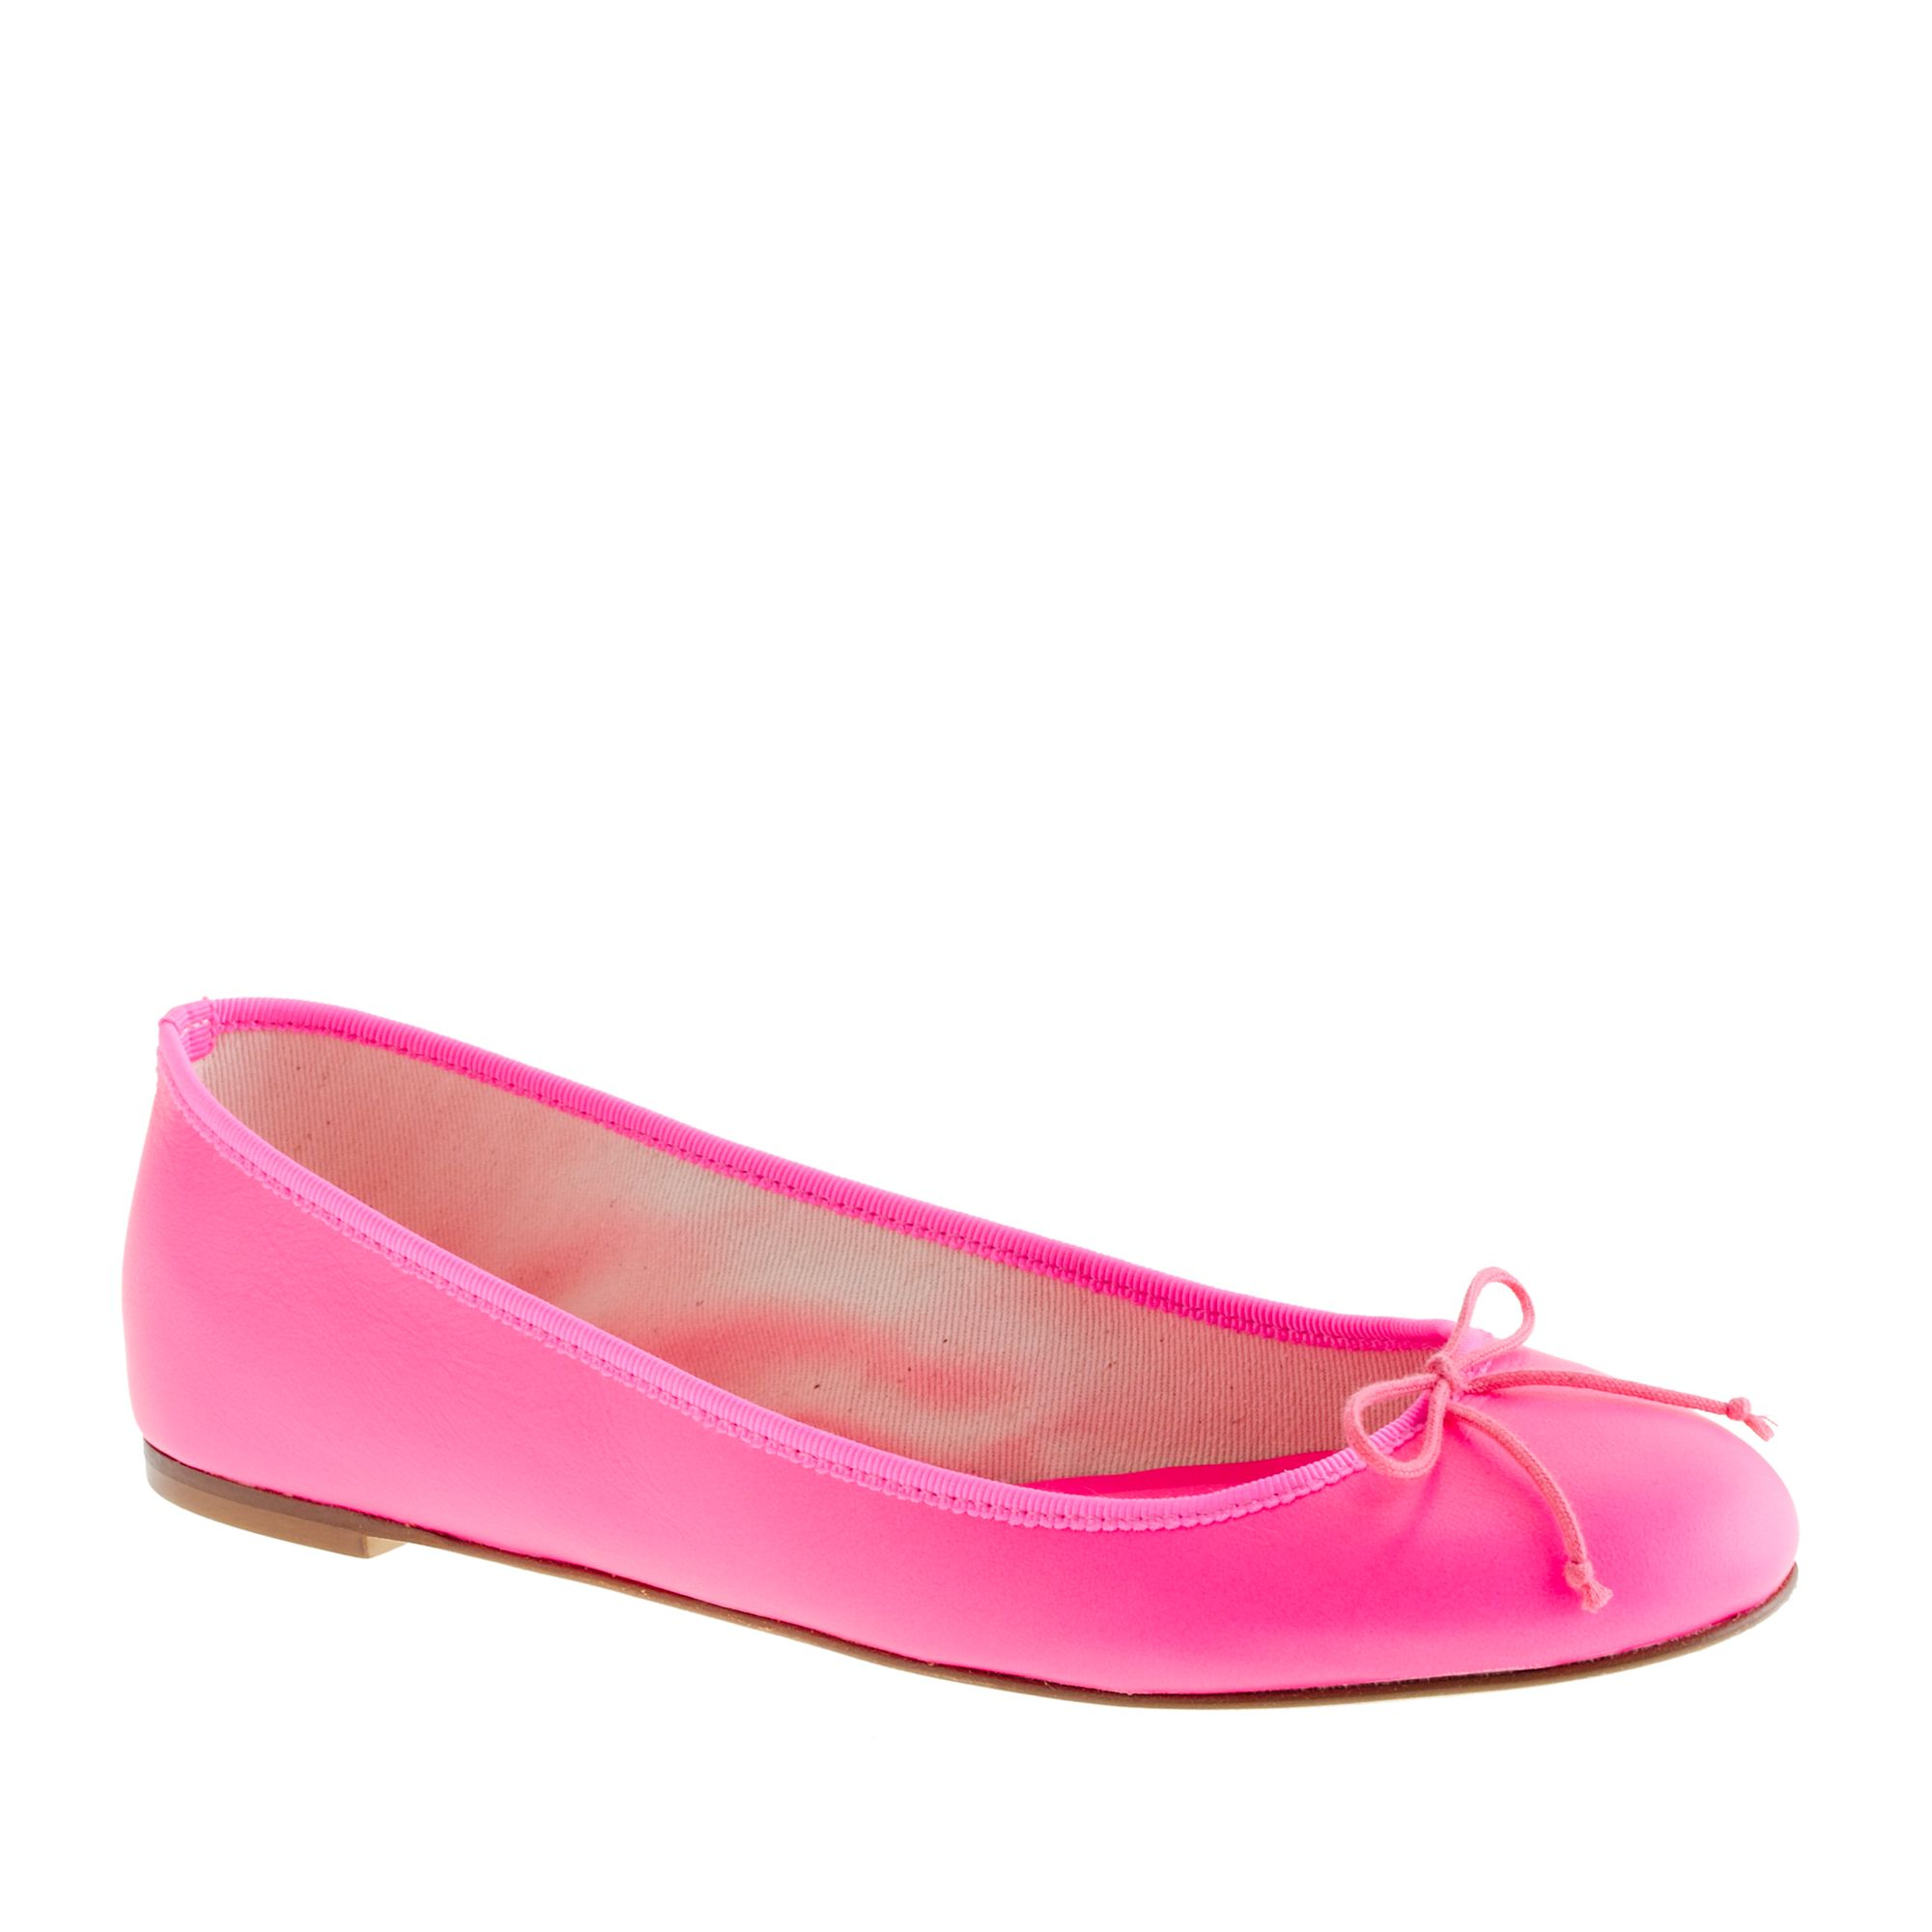 Lyst - J.Crew Classic Leather Ballet Flats in Pink